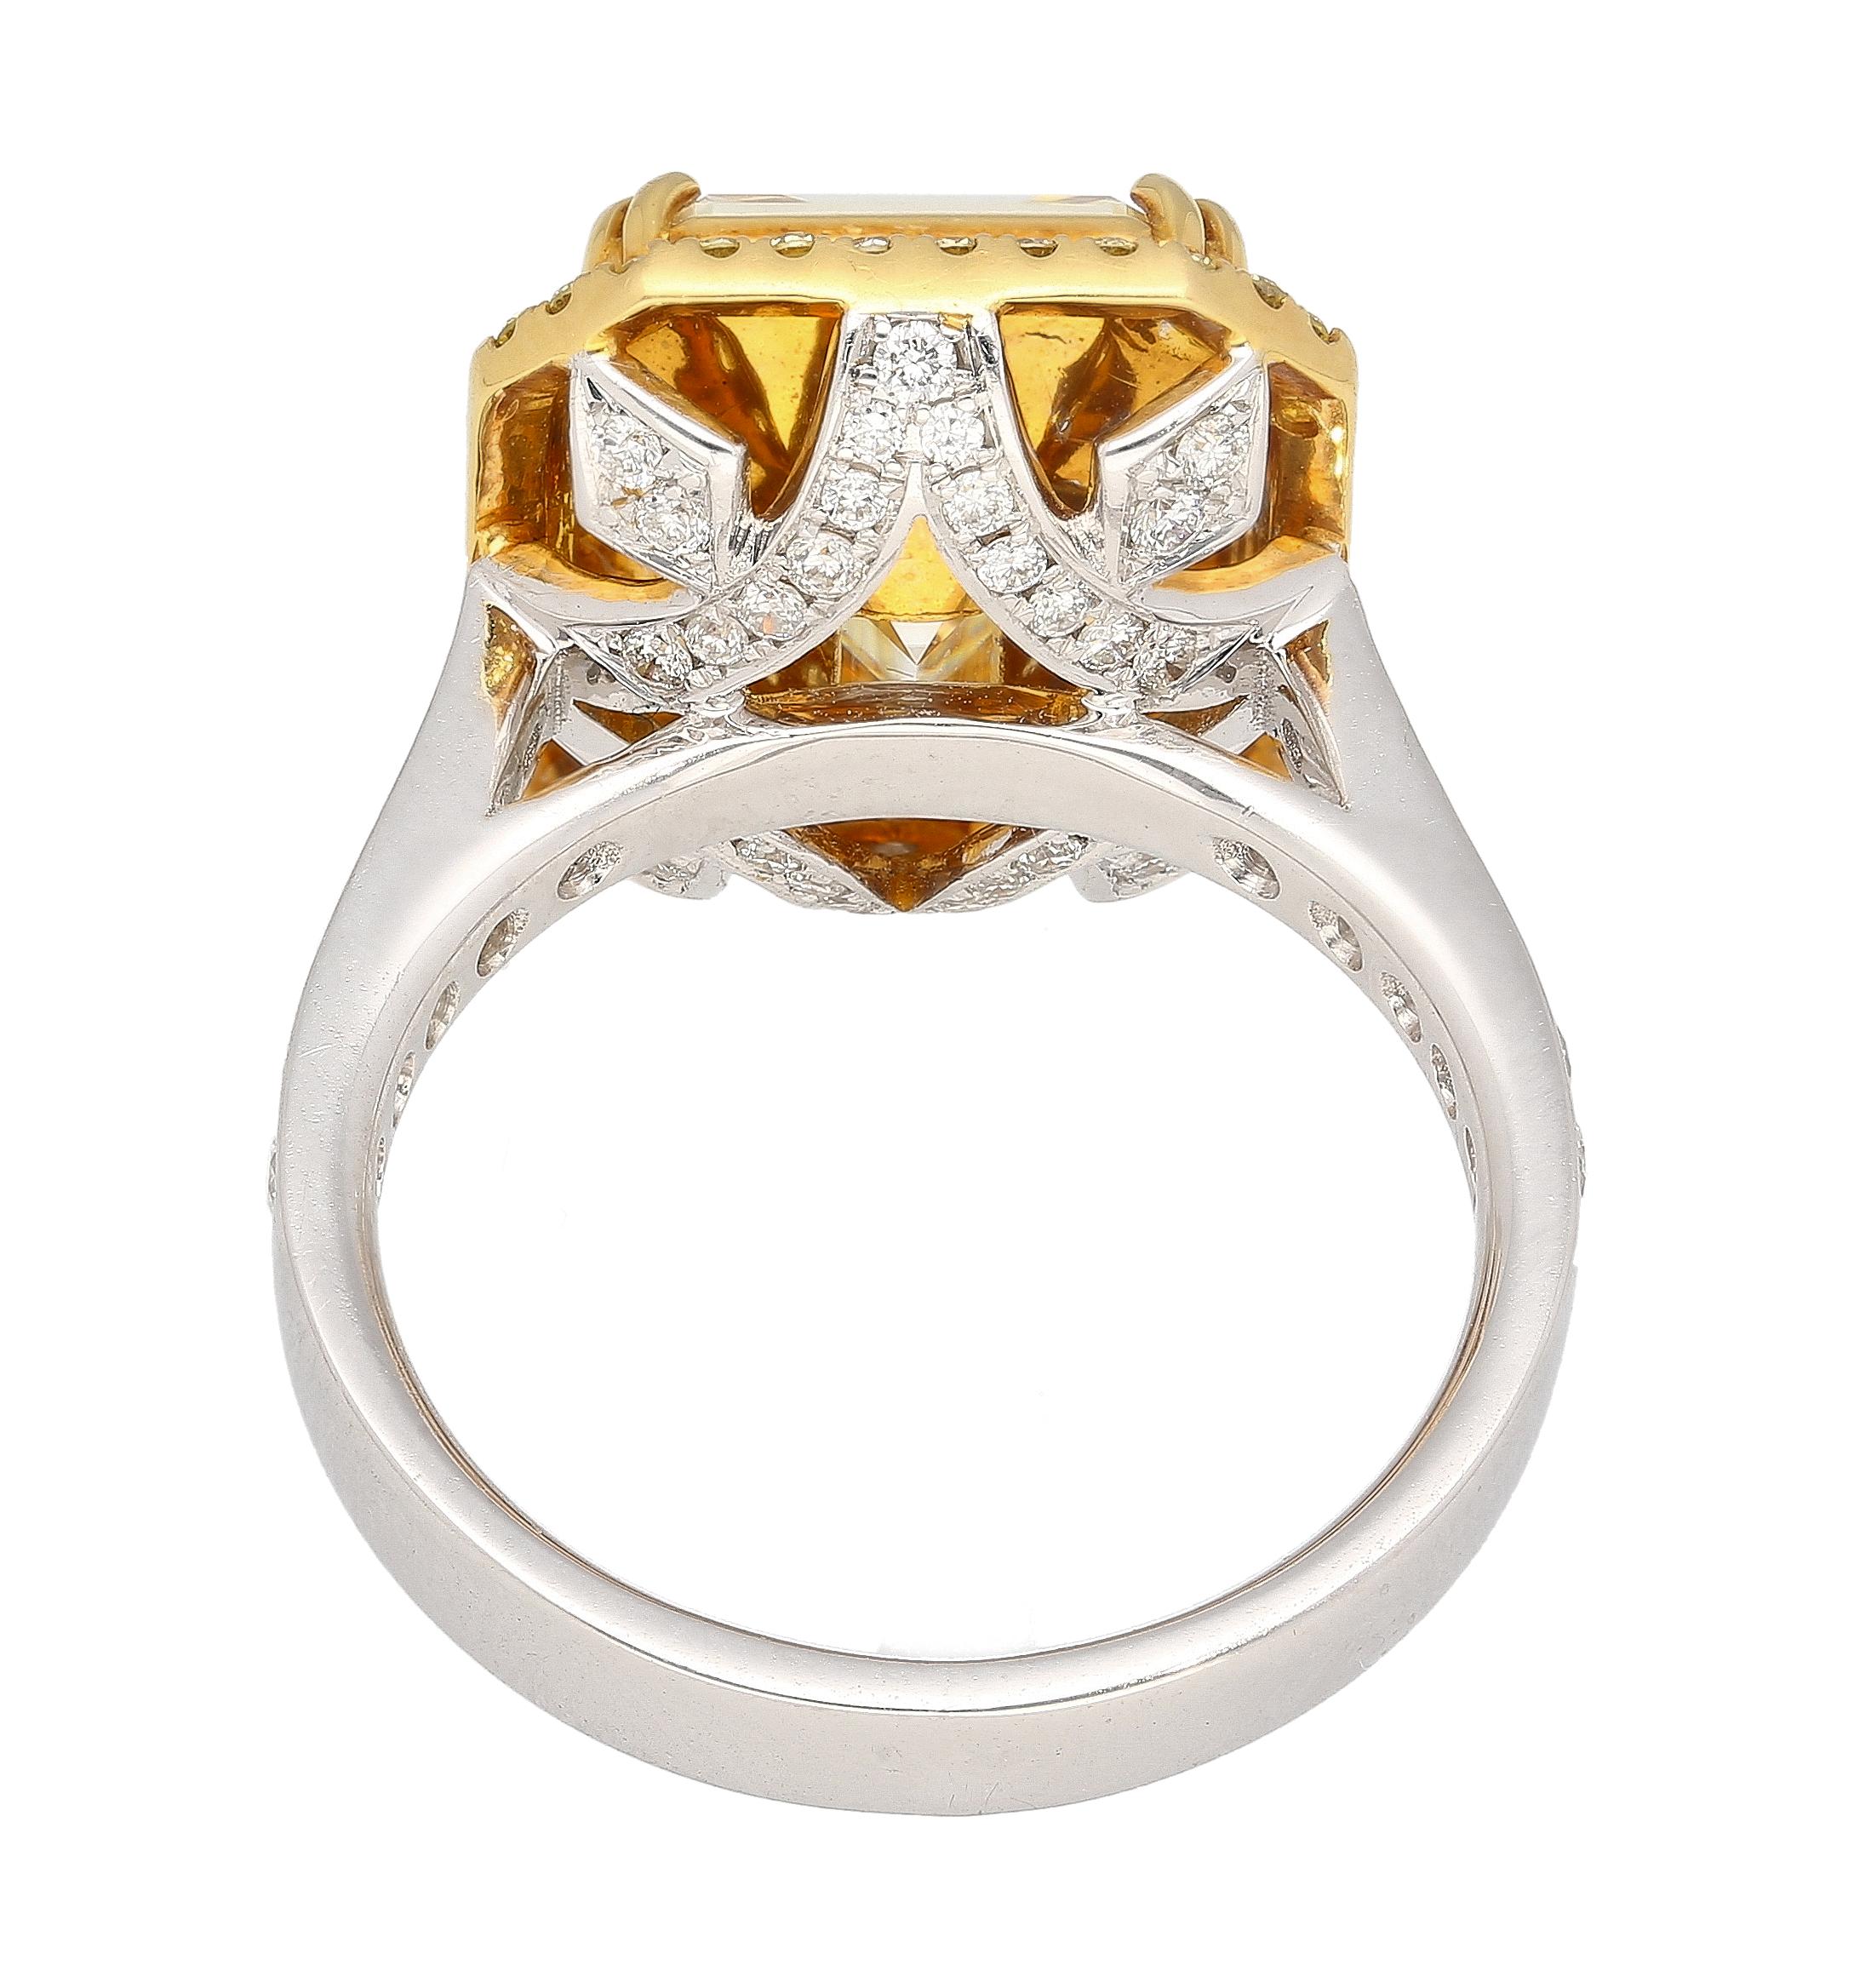 Introducing our exquisite 18K White and Yellow Gold Ring, weighing 7.20 grams, and featuring a stunning 7.25 Carat Emerald-cut Fancy Light Yellow Natural Diamond at the center. The ring is further adorned with 40 Round-cut Diamonds totaling 0.26